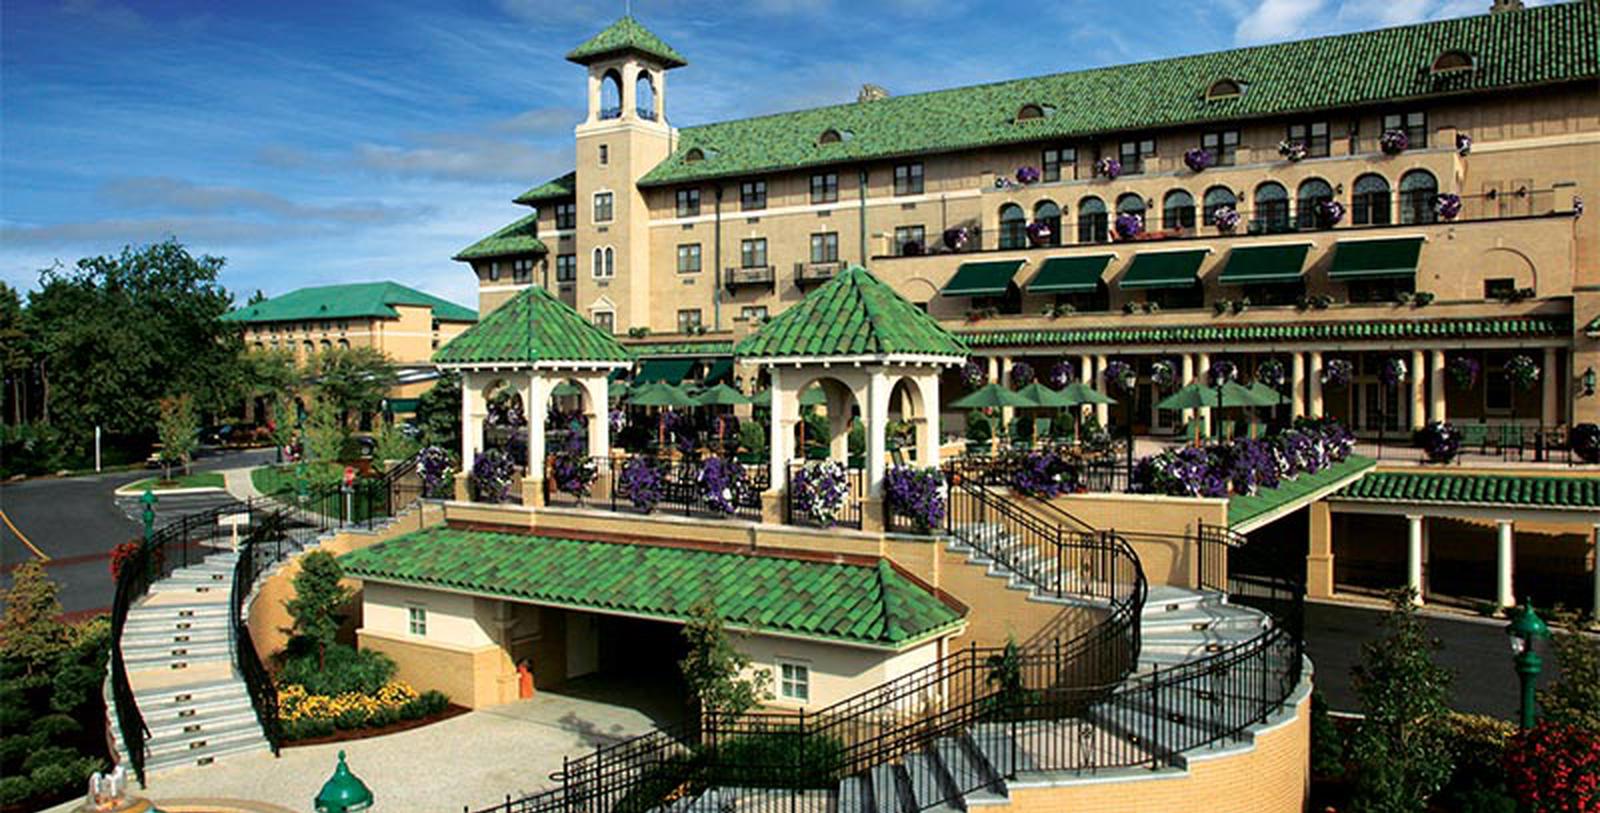 Image of exterior and entrance to The Hotel Hershey in Pennsylvania.